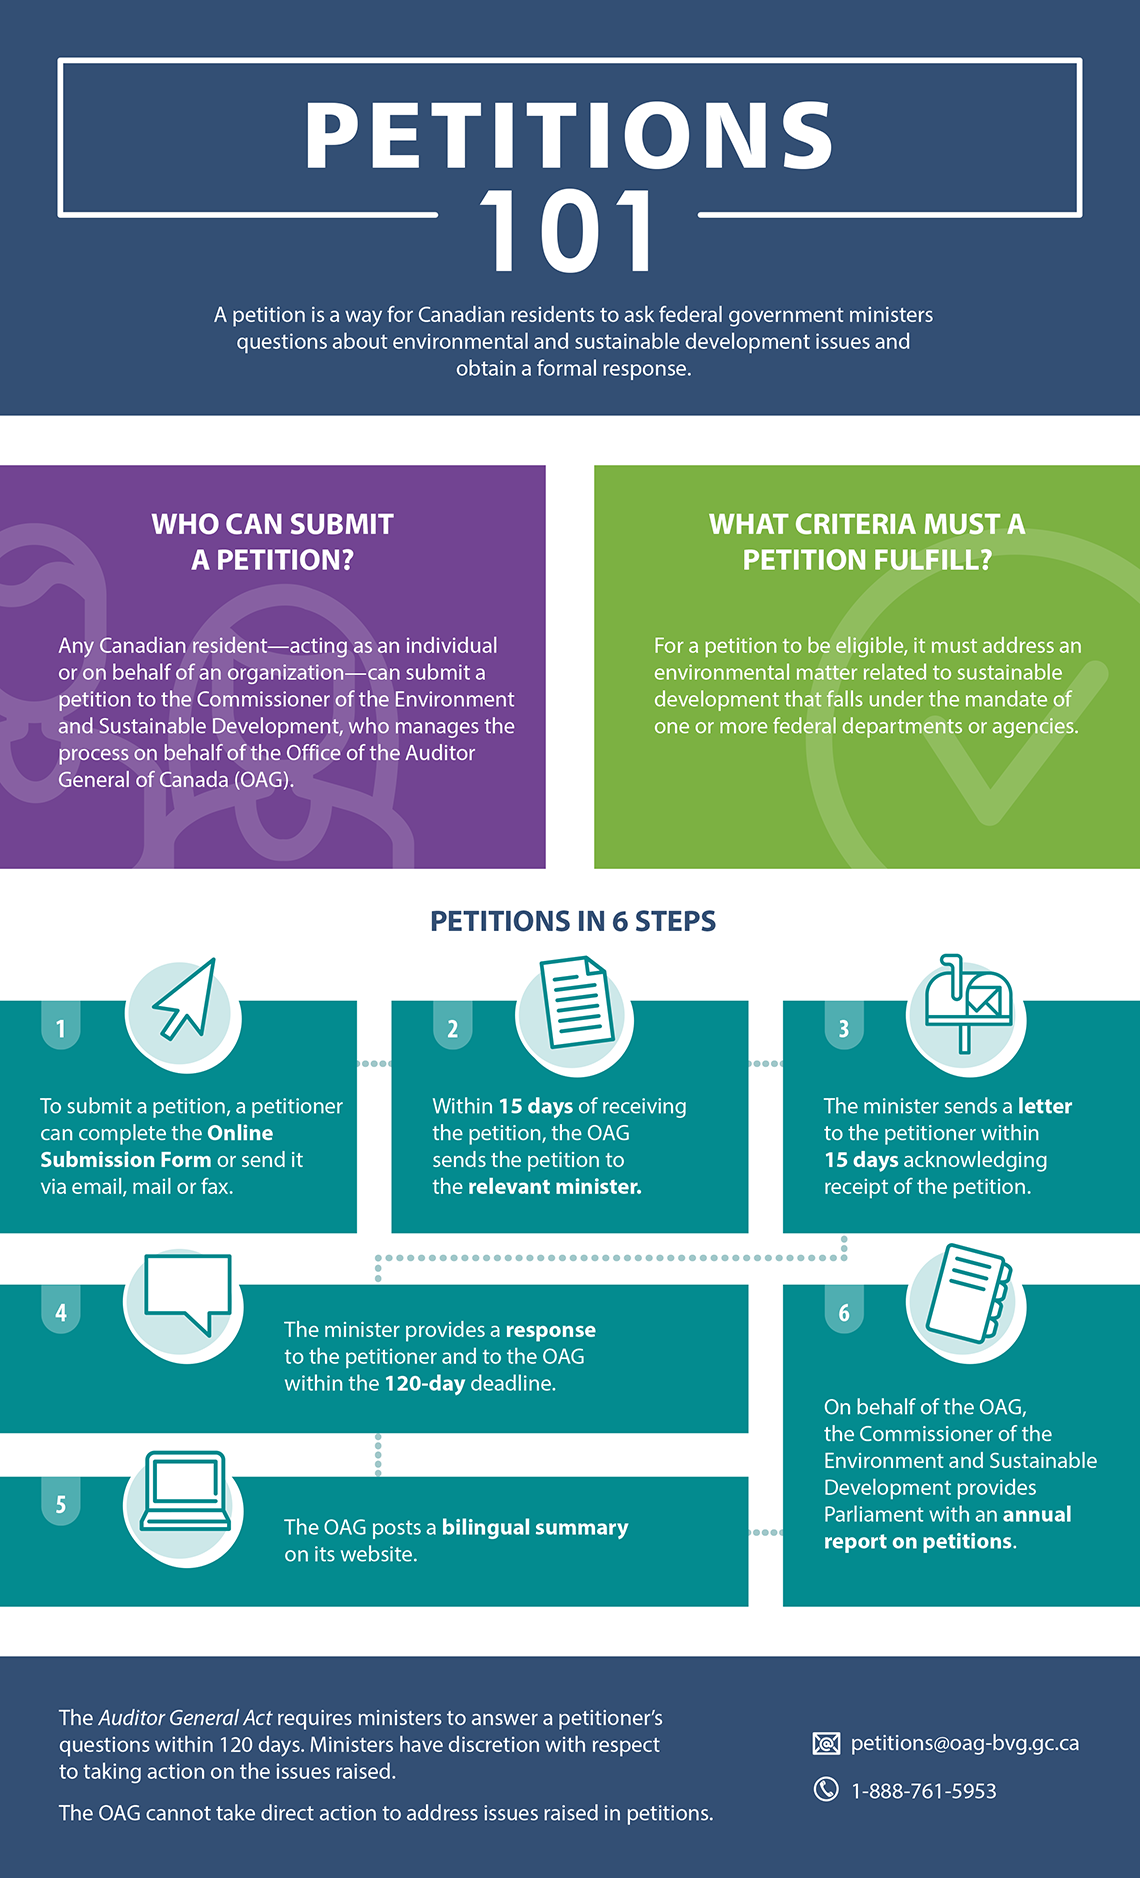 This infographic explains how environmental petitions work